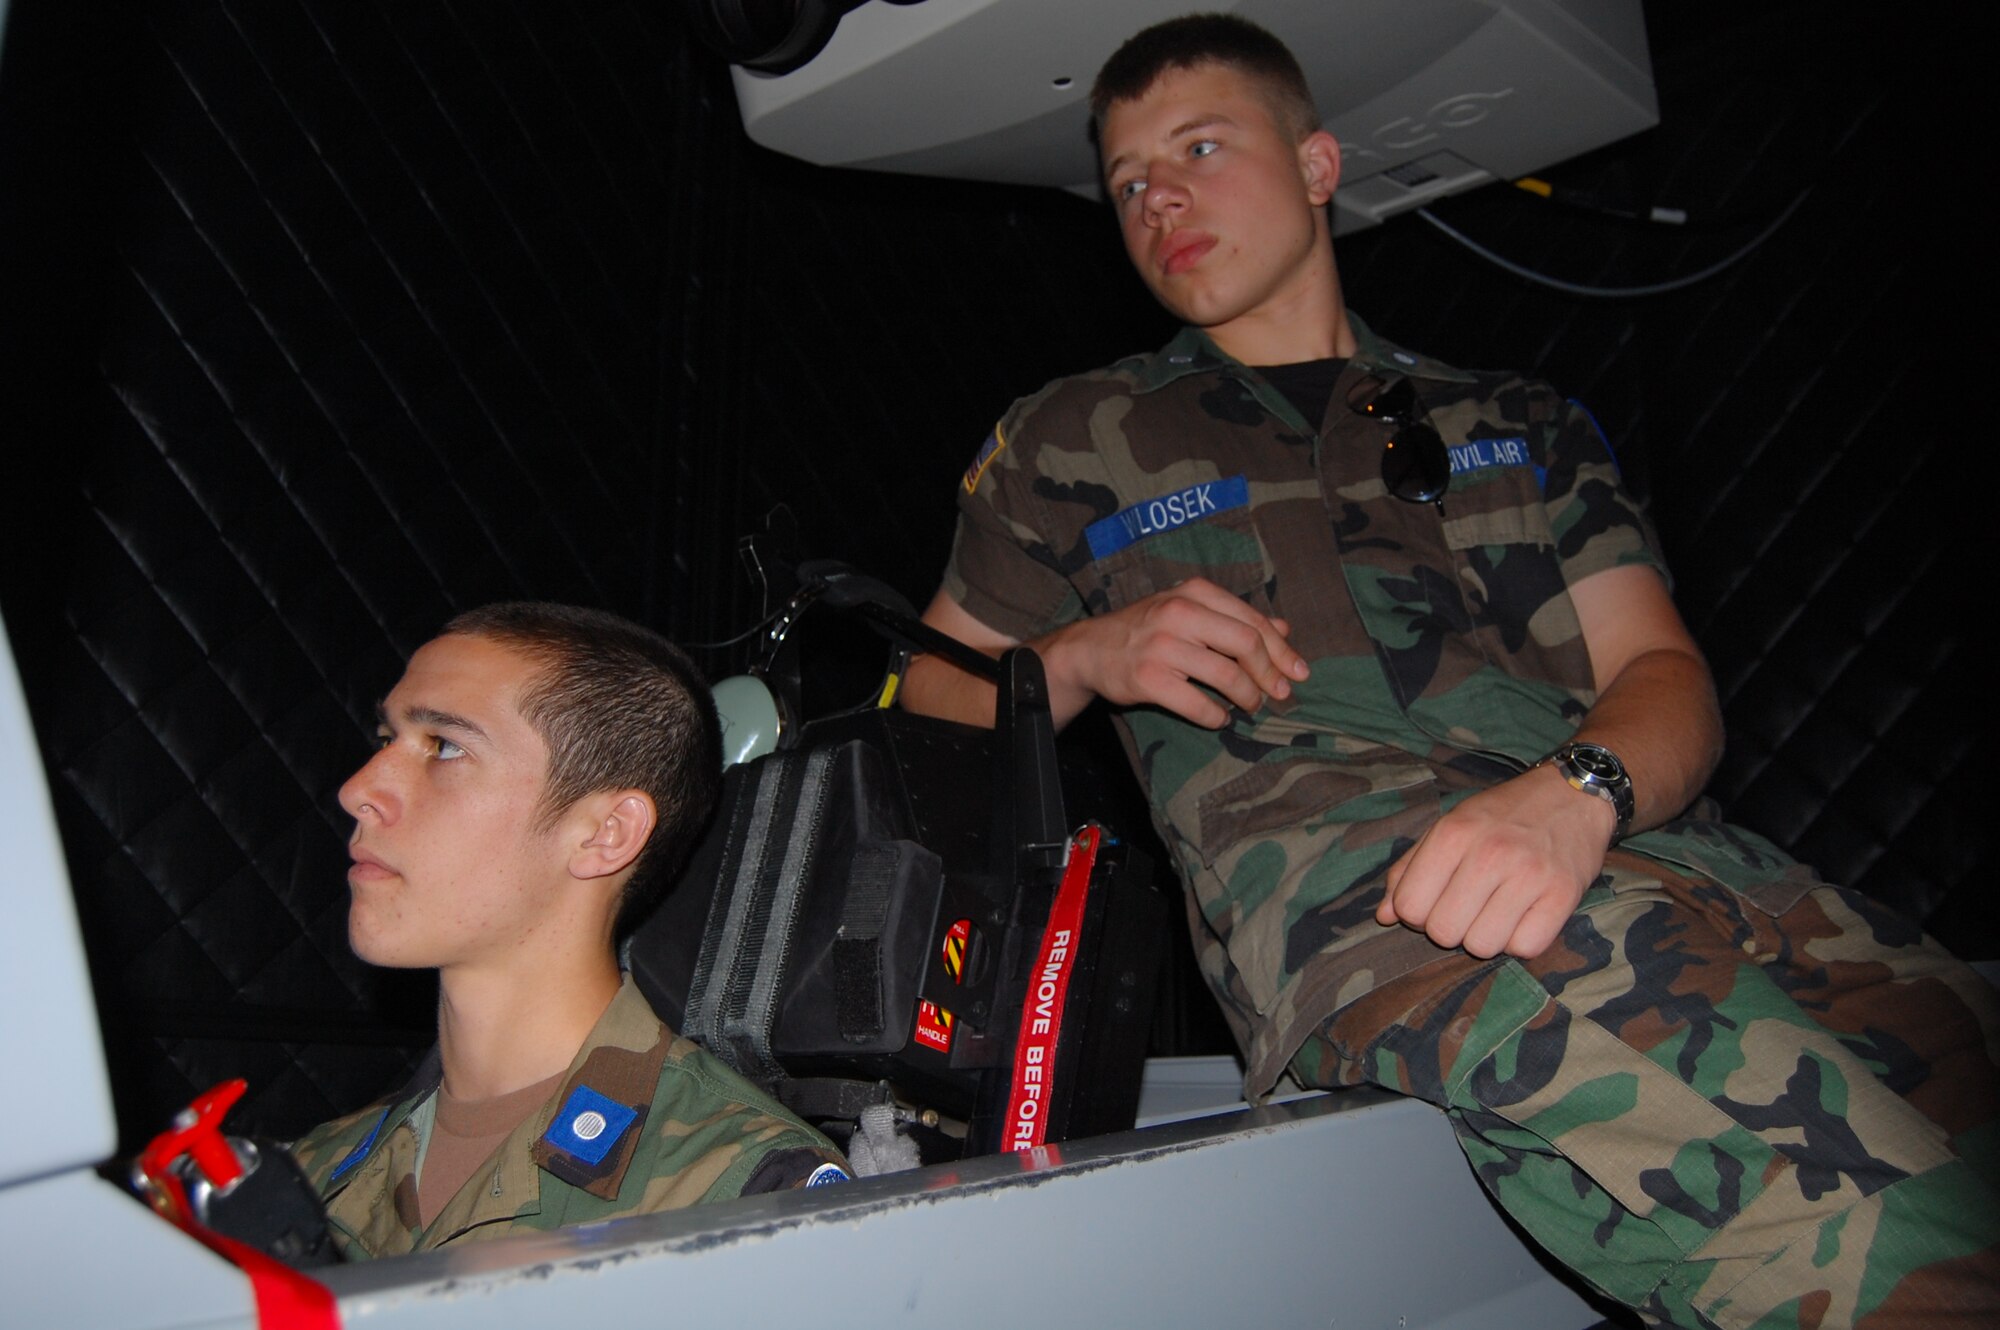 LAUGHLIN AIR FORCE BASE, Texas – Cadet Bobby Wlosek, Chicago Civil Air Patrol, observes while cadet Ryan Cole, Clarke County Composite Squadron in Athens, Ga., flies a T-6 simulator here June 24. The Civil Air Patrol cadets participated June 18 through 26 in the Specialized Undergraduate Pilot Training Familiarization Course. The cadets traveled from across the nation to learn about the training Air Force pilots must complete before they are qualified to fly. (U.S. Air Force photo by Staff Sgt. Desiree Economides) 